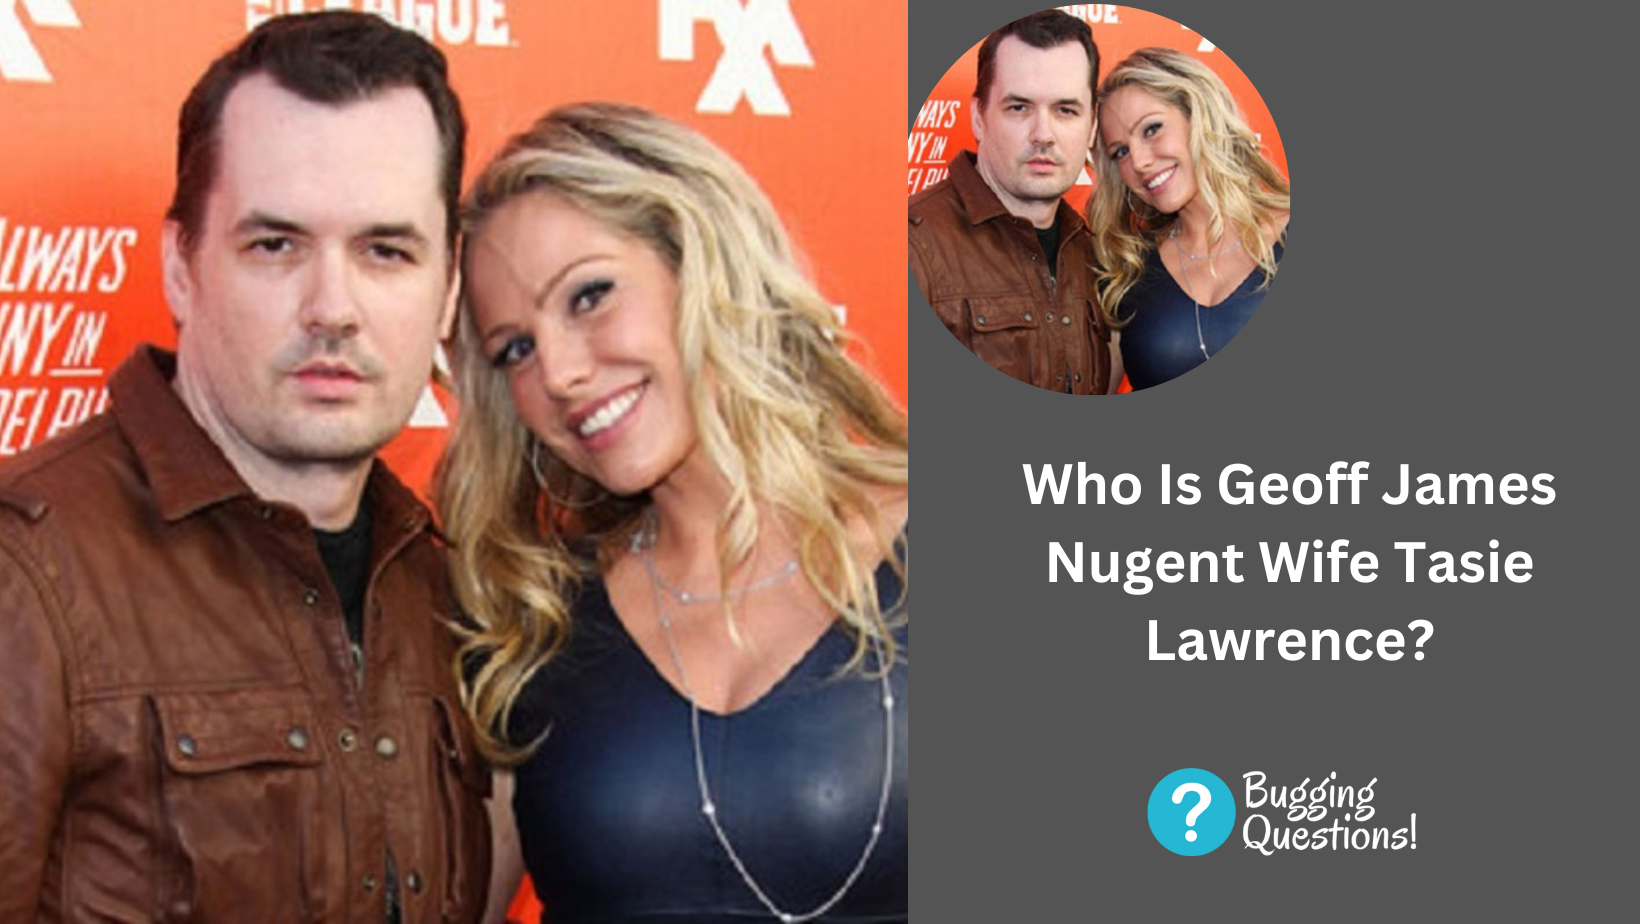 Who Is Geoff James Nugent Wife Tasie Lawrence?